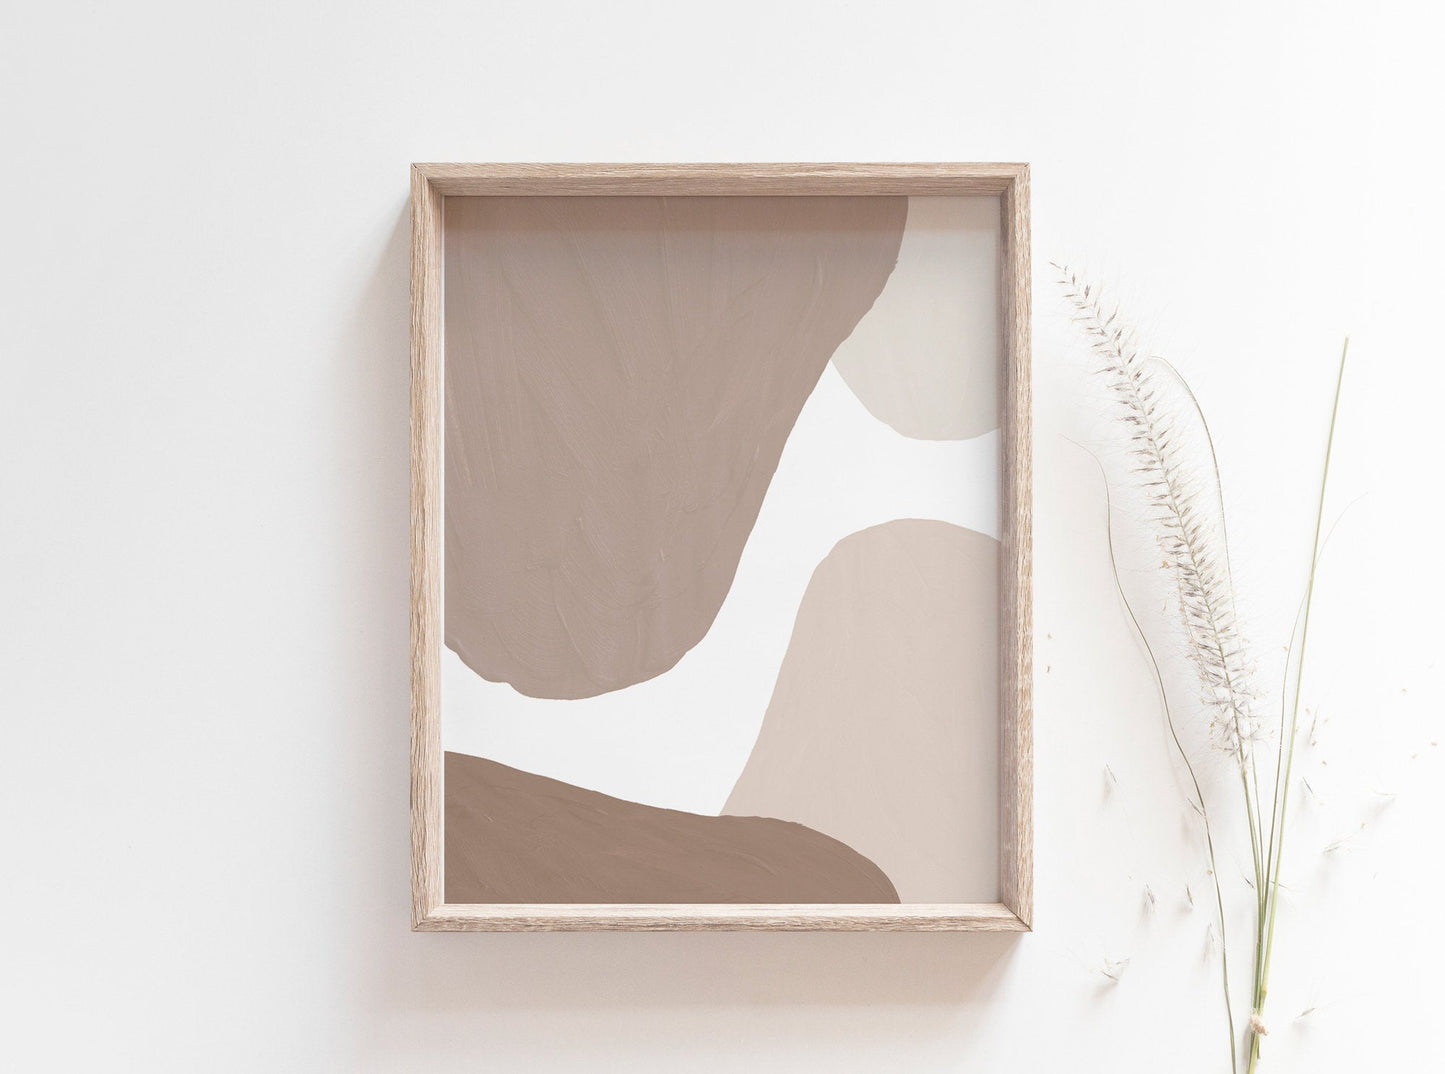 Large Abstract Modern Art - Neutral Abstract Shapes - Master Bedroom Instant Printable Download - Sand Beige Pink Brown - Print from Home